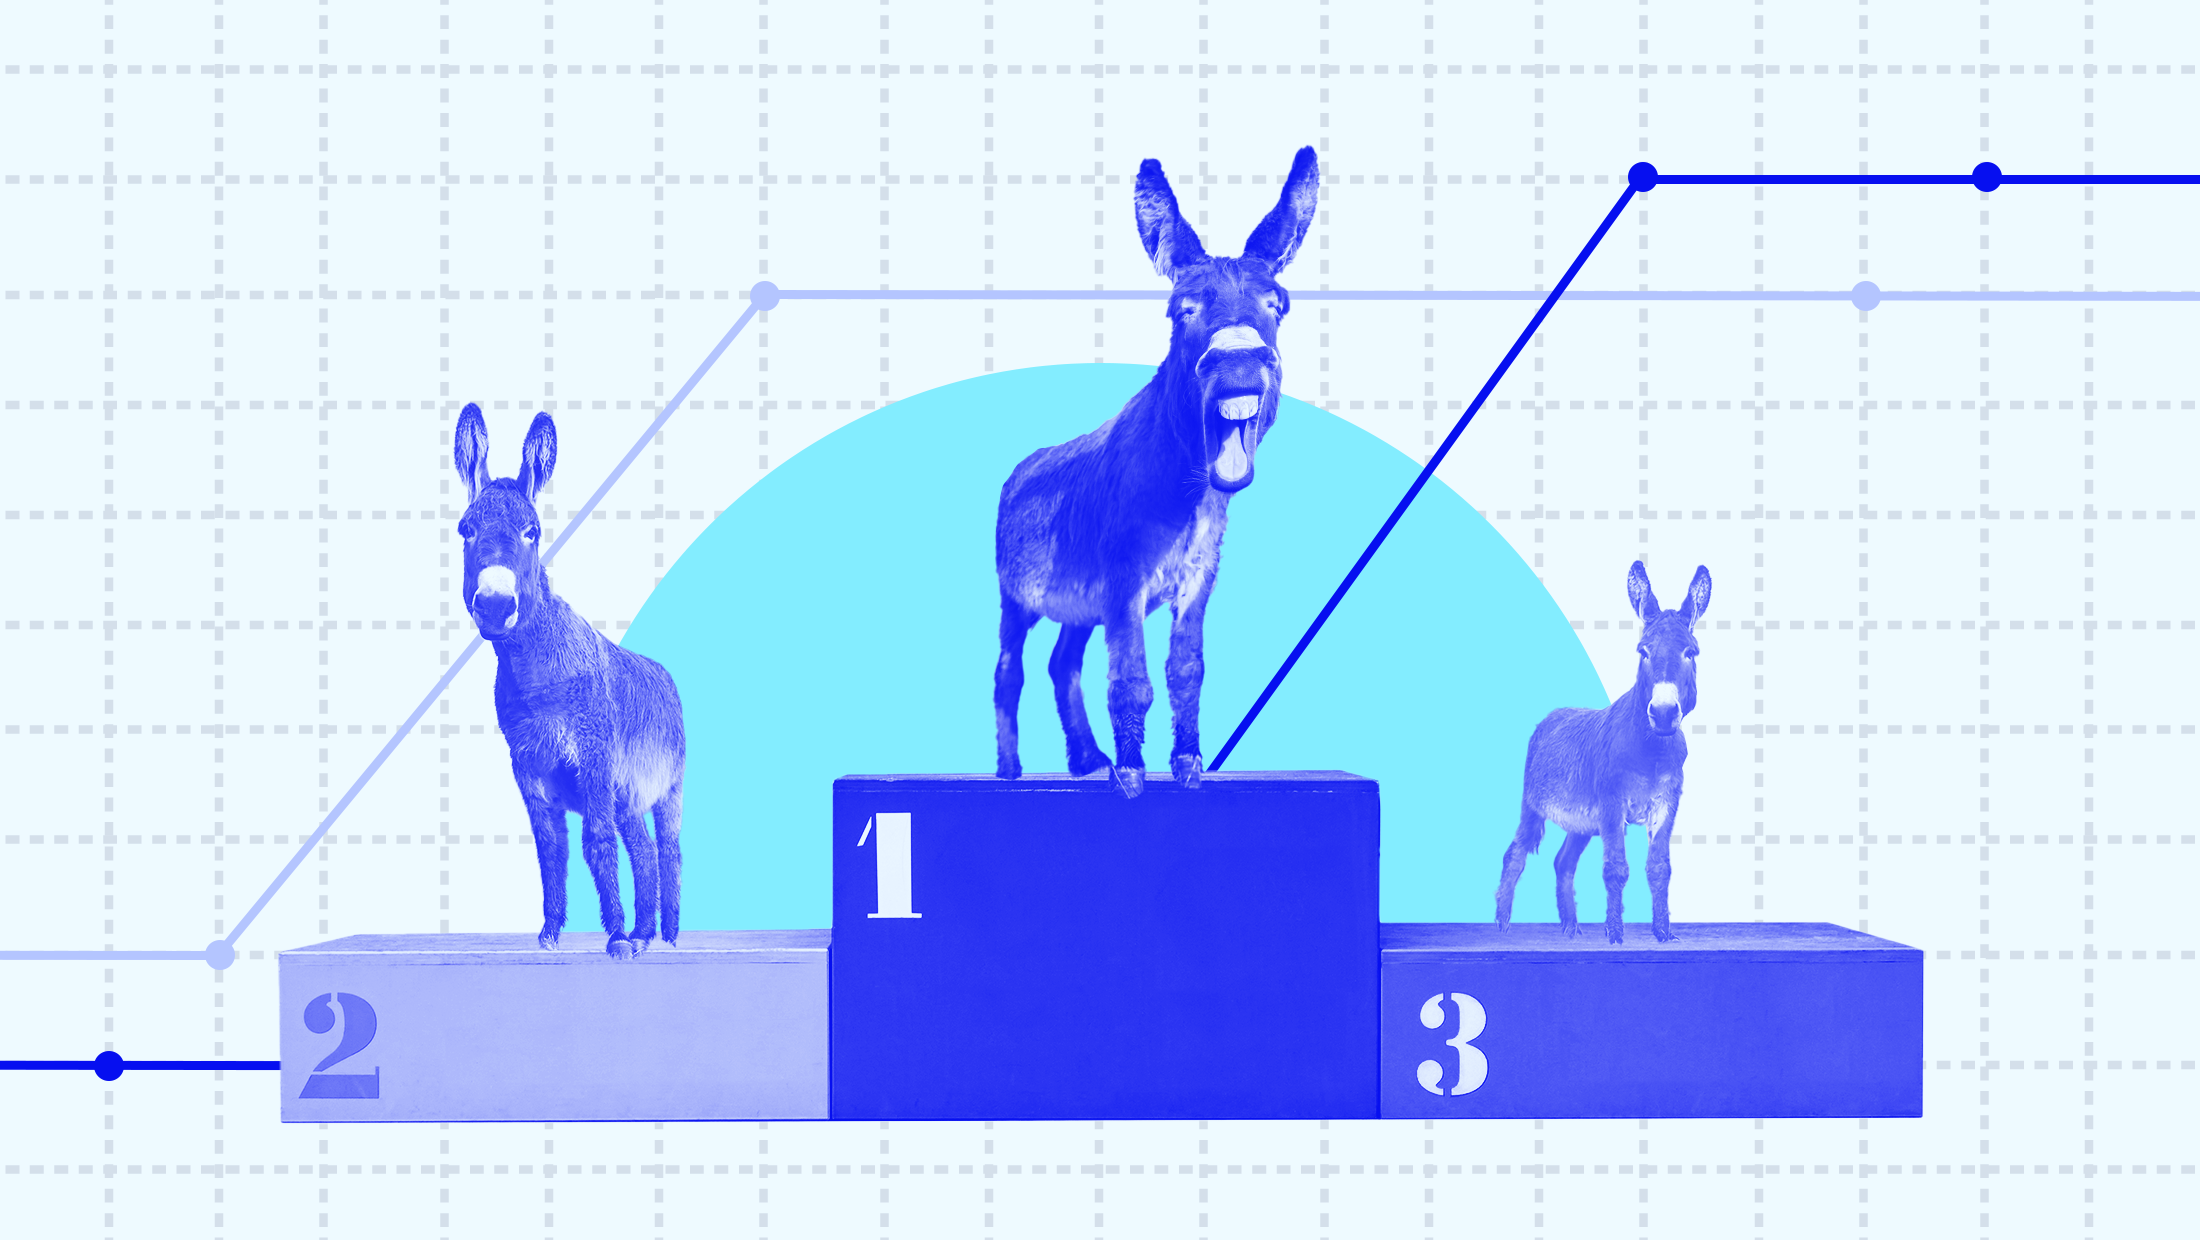 Three blue donkeys occupying all three spots on a podium that is labelled with the numbers 1, 2 and 3, mounted on a piece of graph paper with various data points